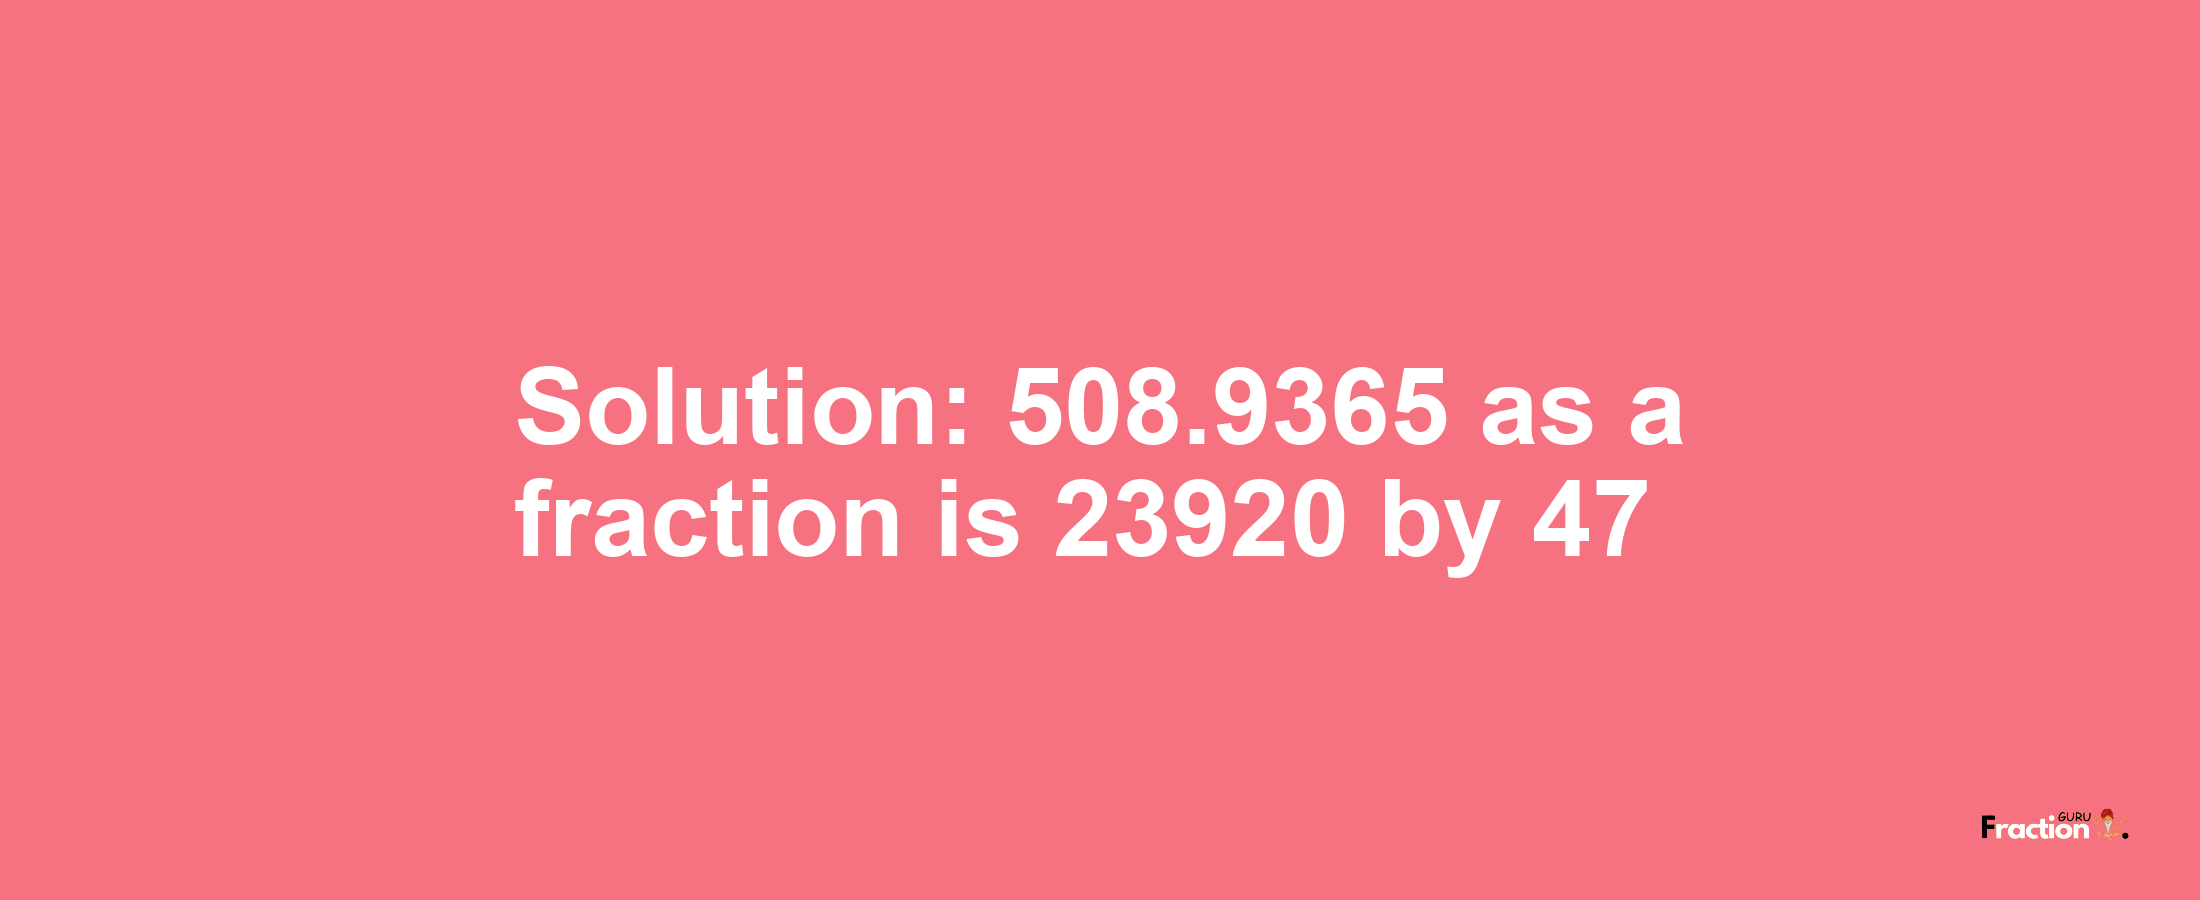 Solution:508.9365 as a fraction is 23920/47